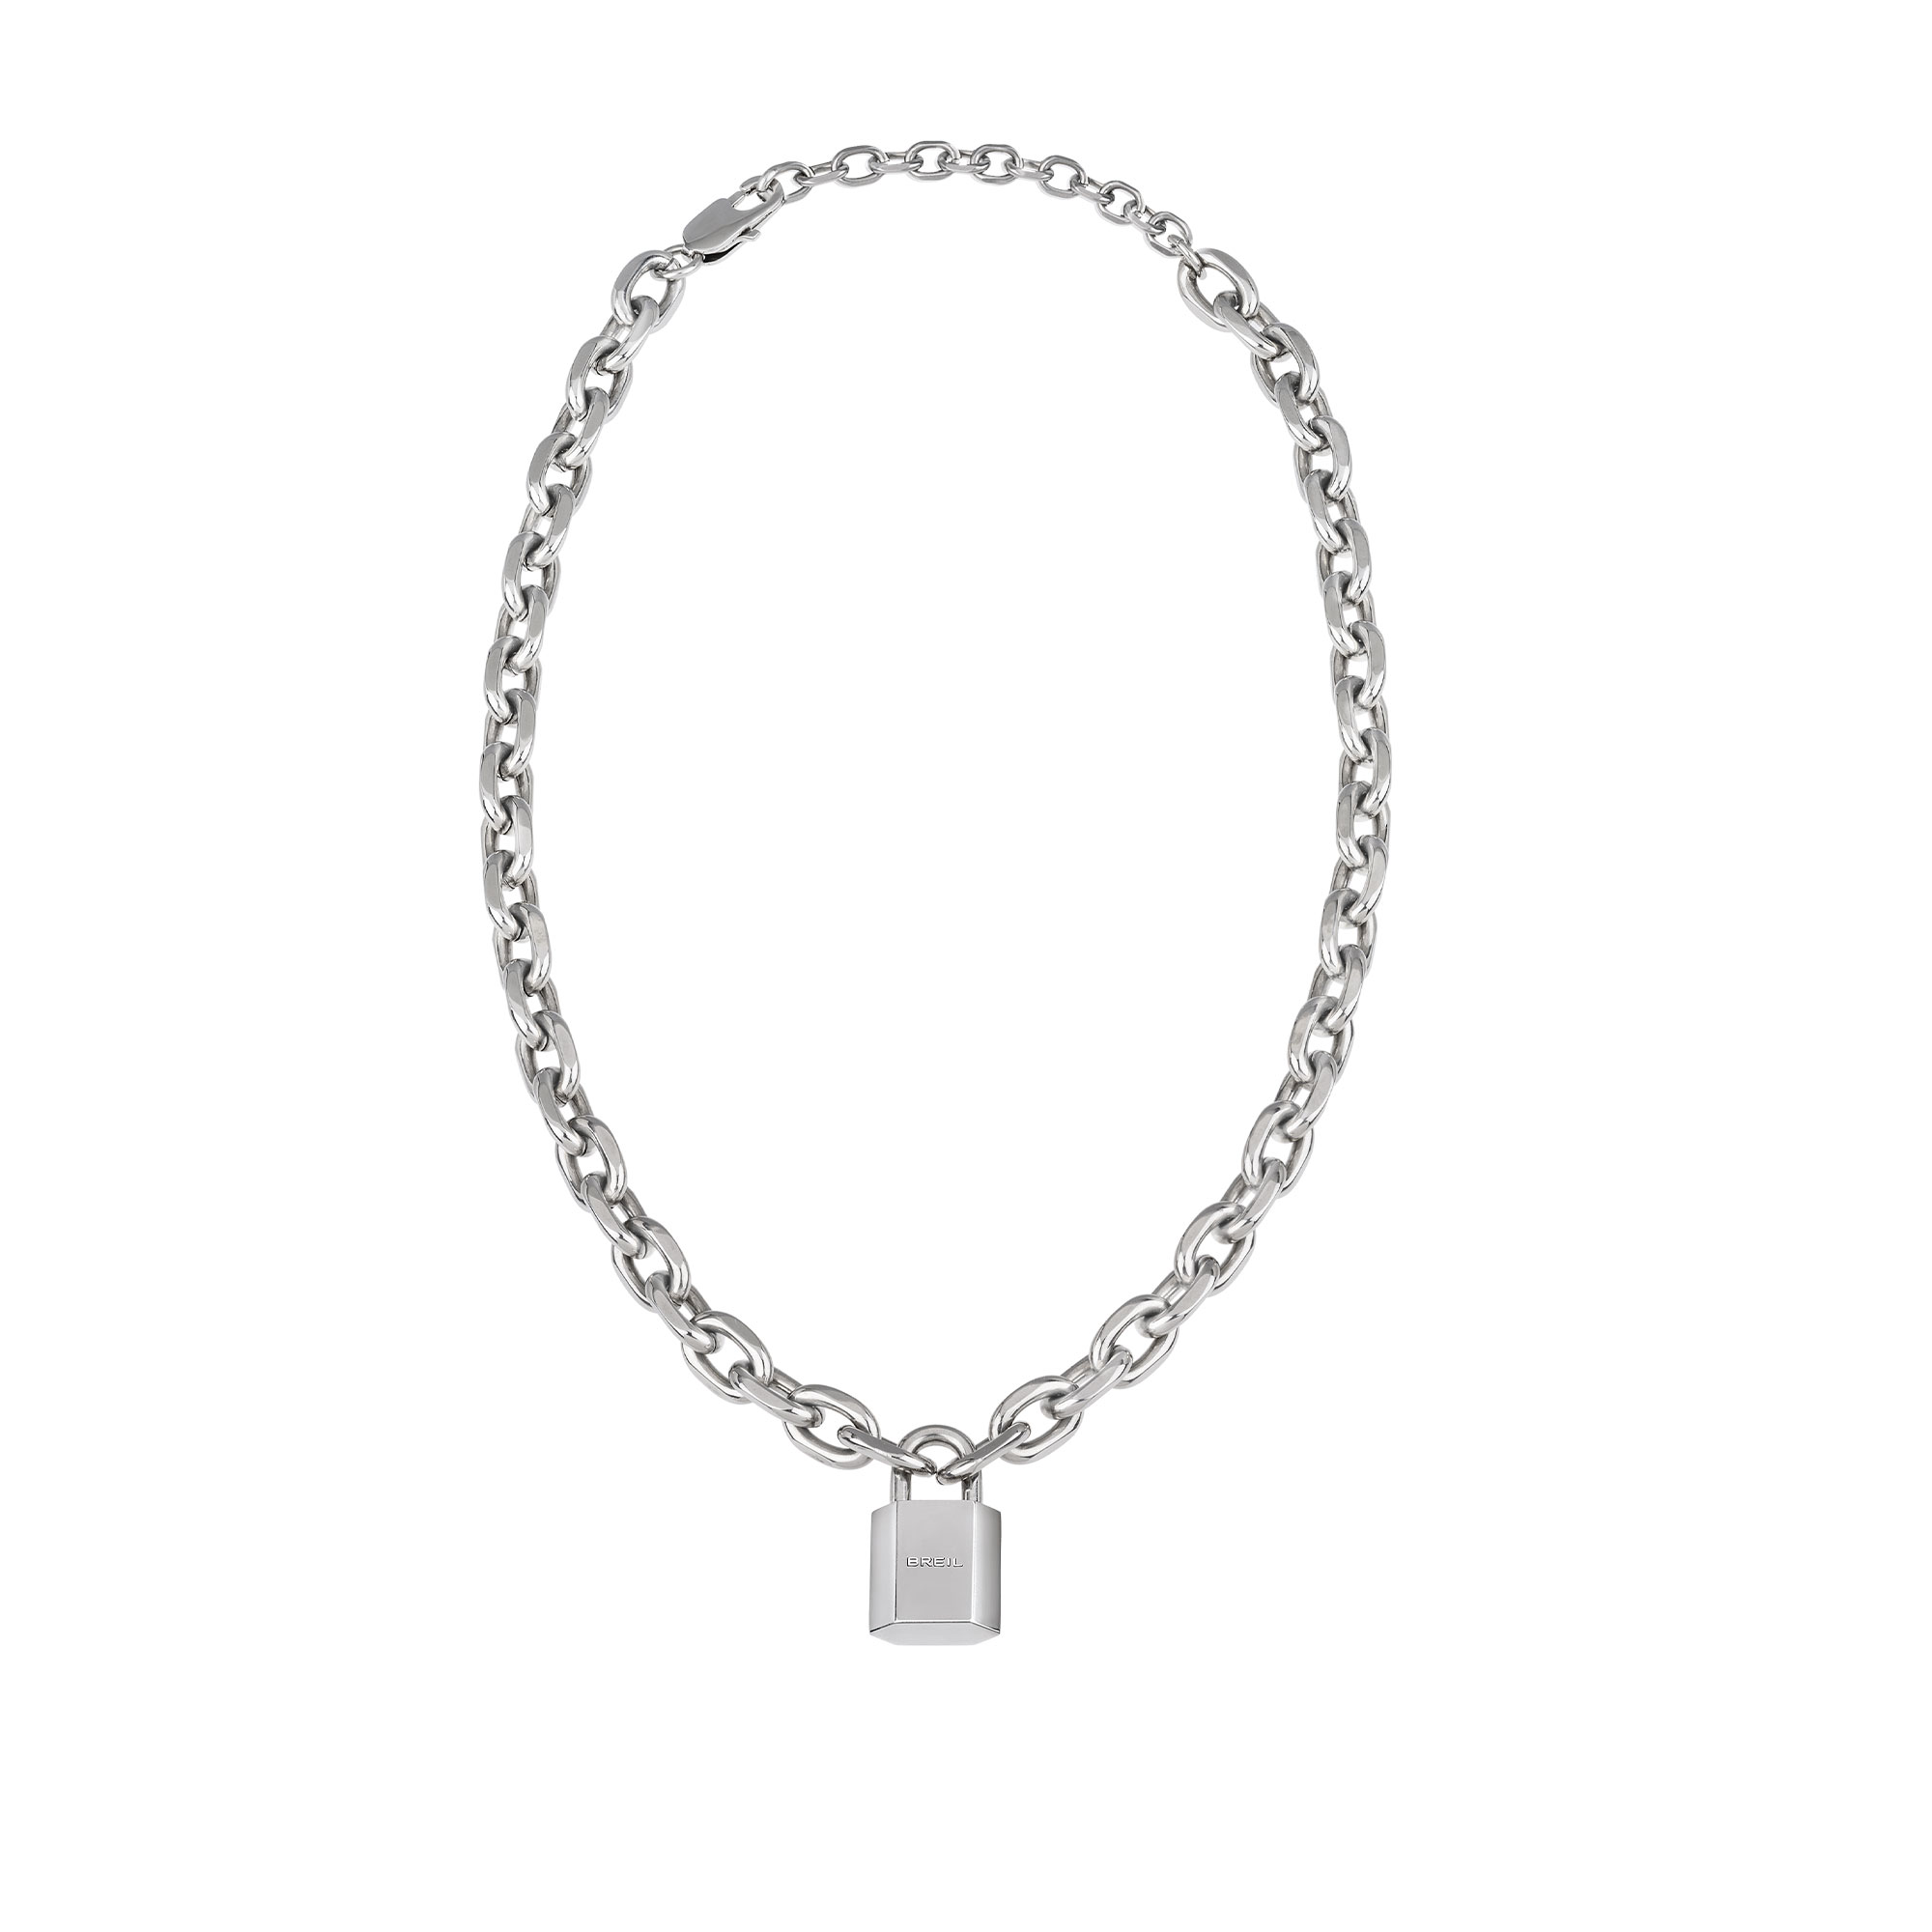 PROMISE - STAINLESS STEEL NECKLACE - 3 - TJ3078 | Breil